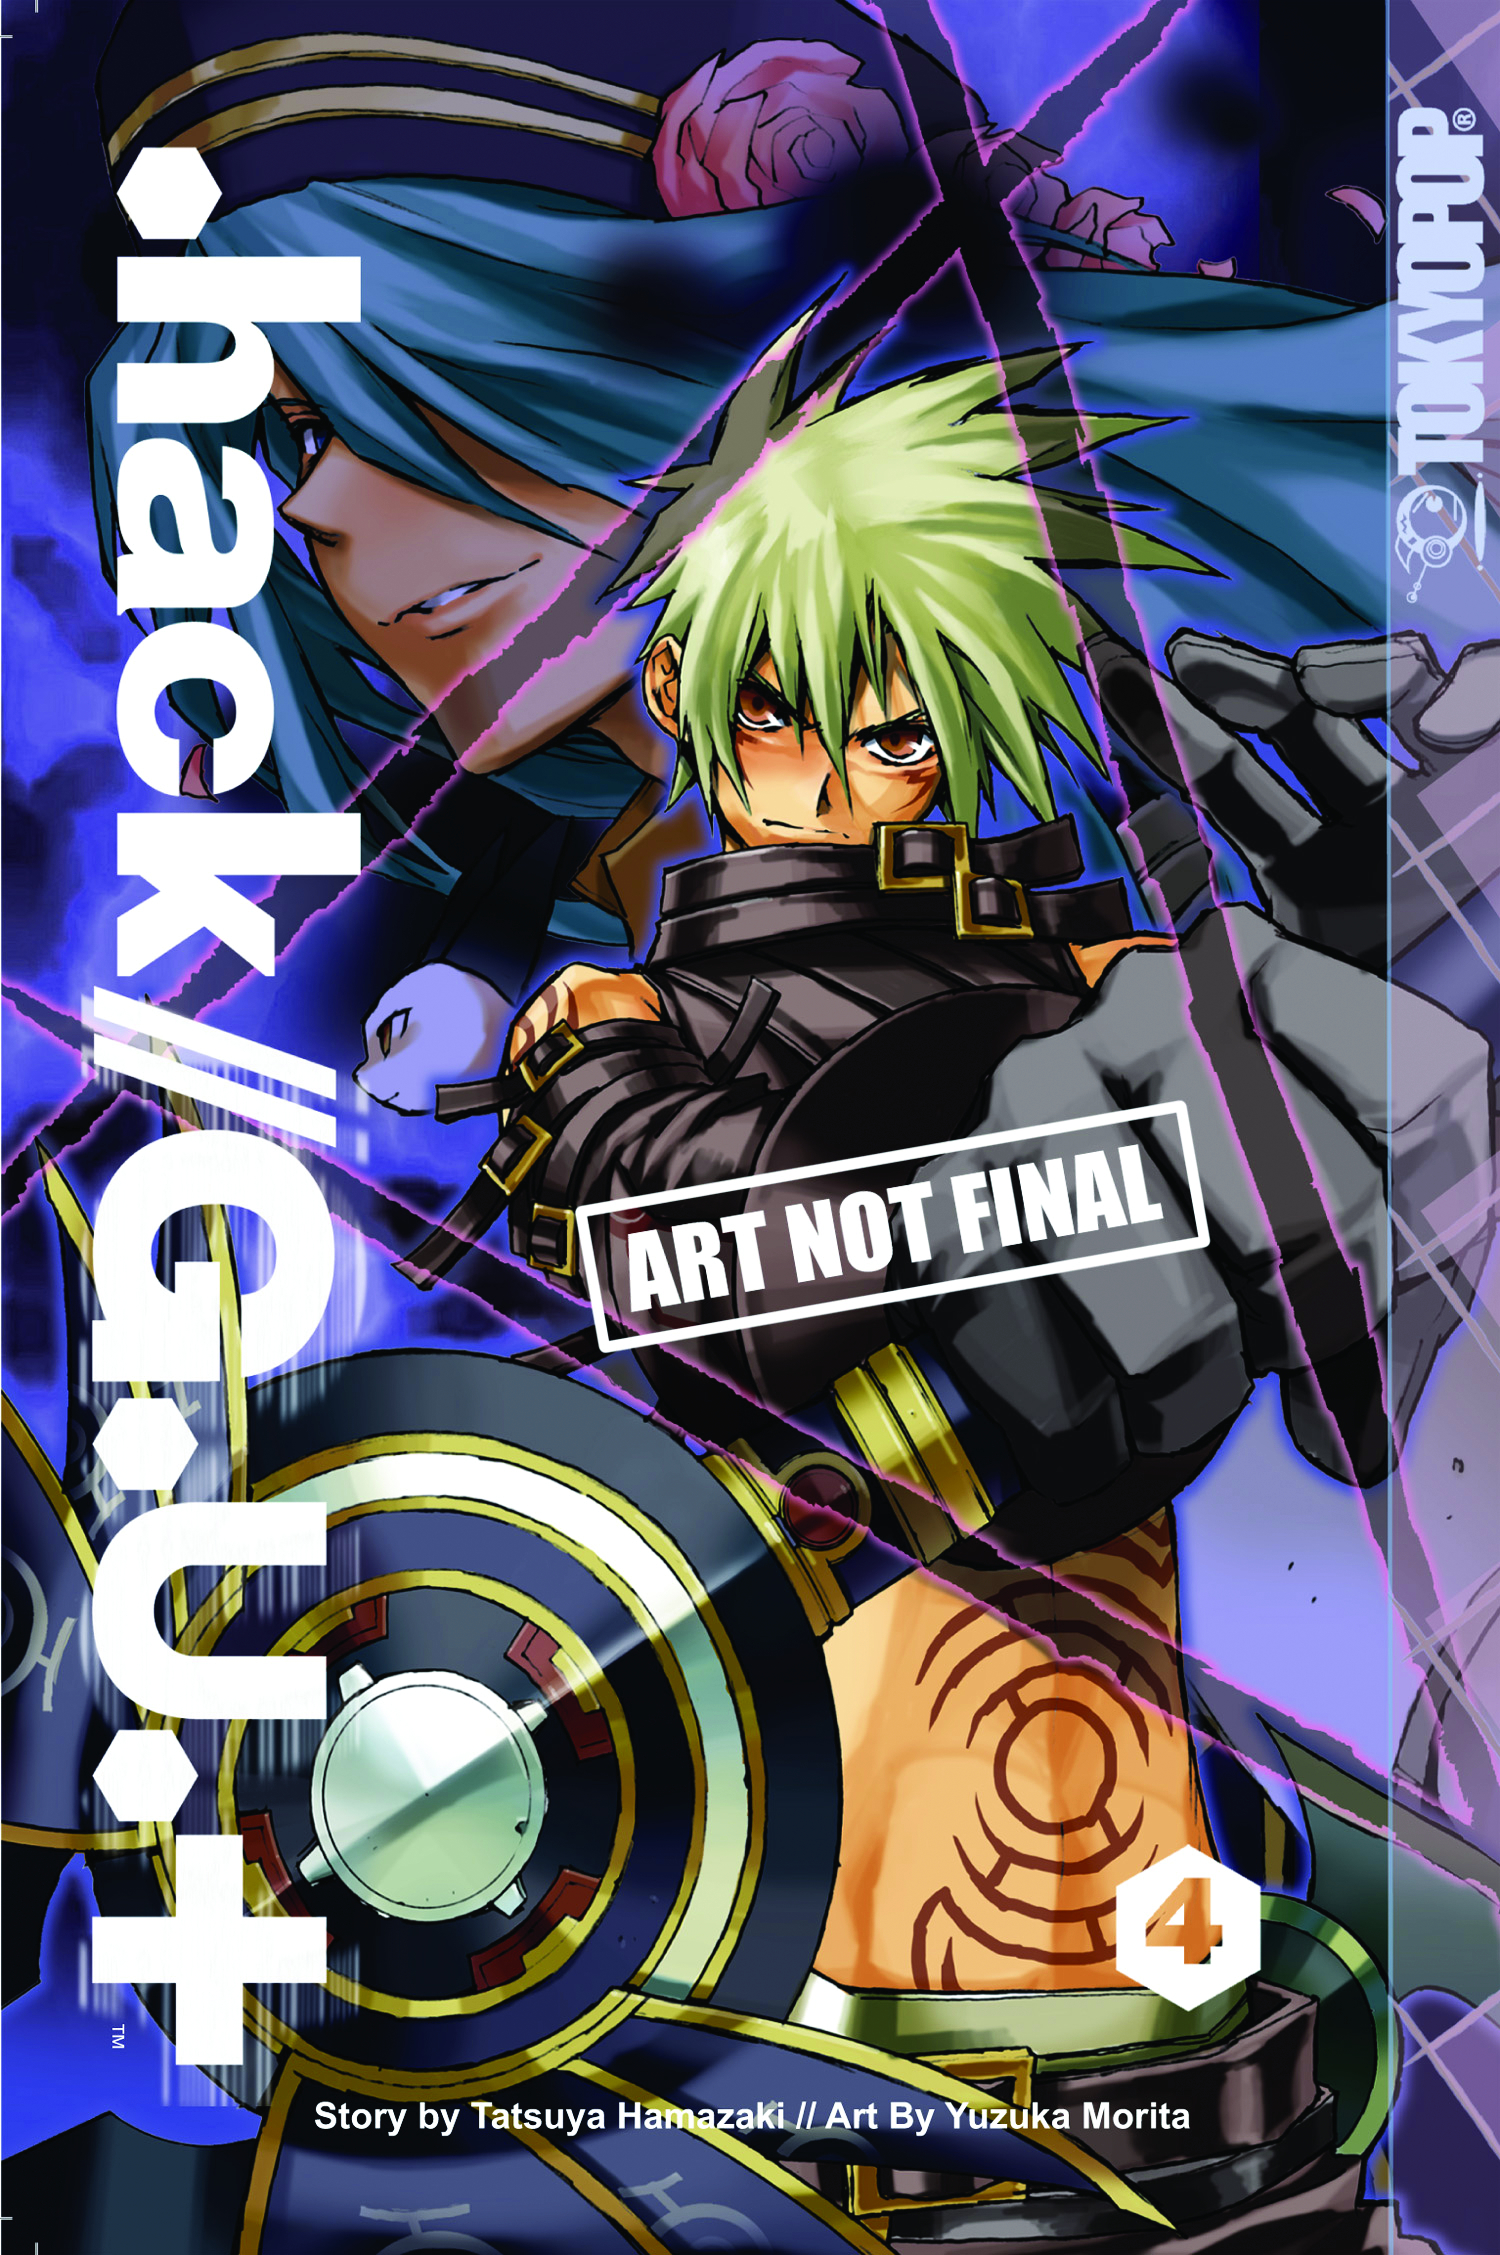 hack//Sign - Pictures 